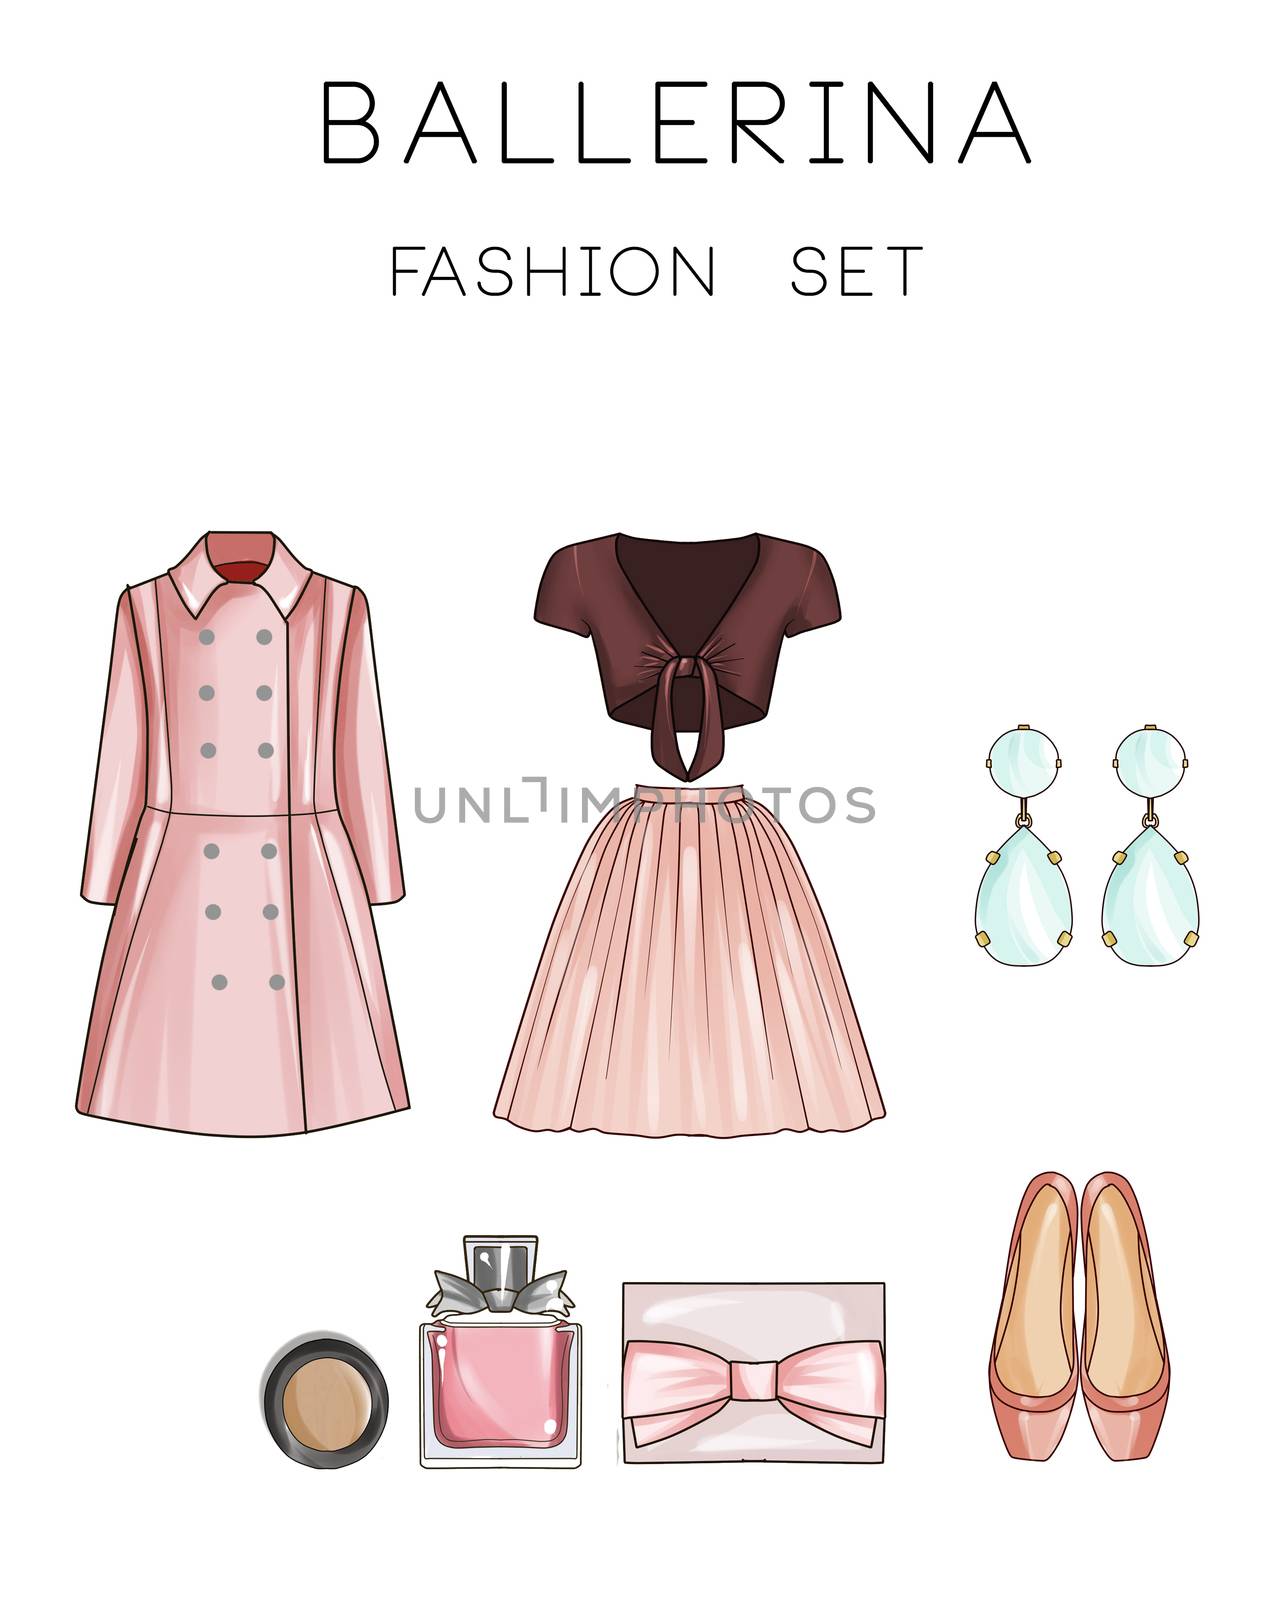 Fashion set of woman's clothes and accessories - Coat, Ballerina skirt, top, make up, flat shoes, diamond earrings